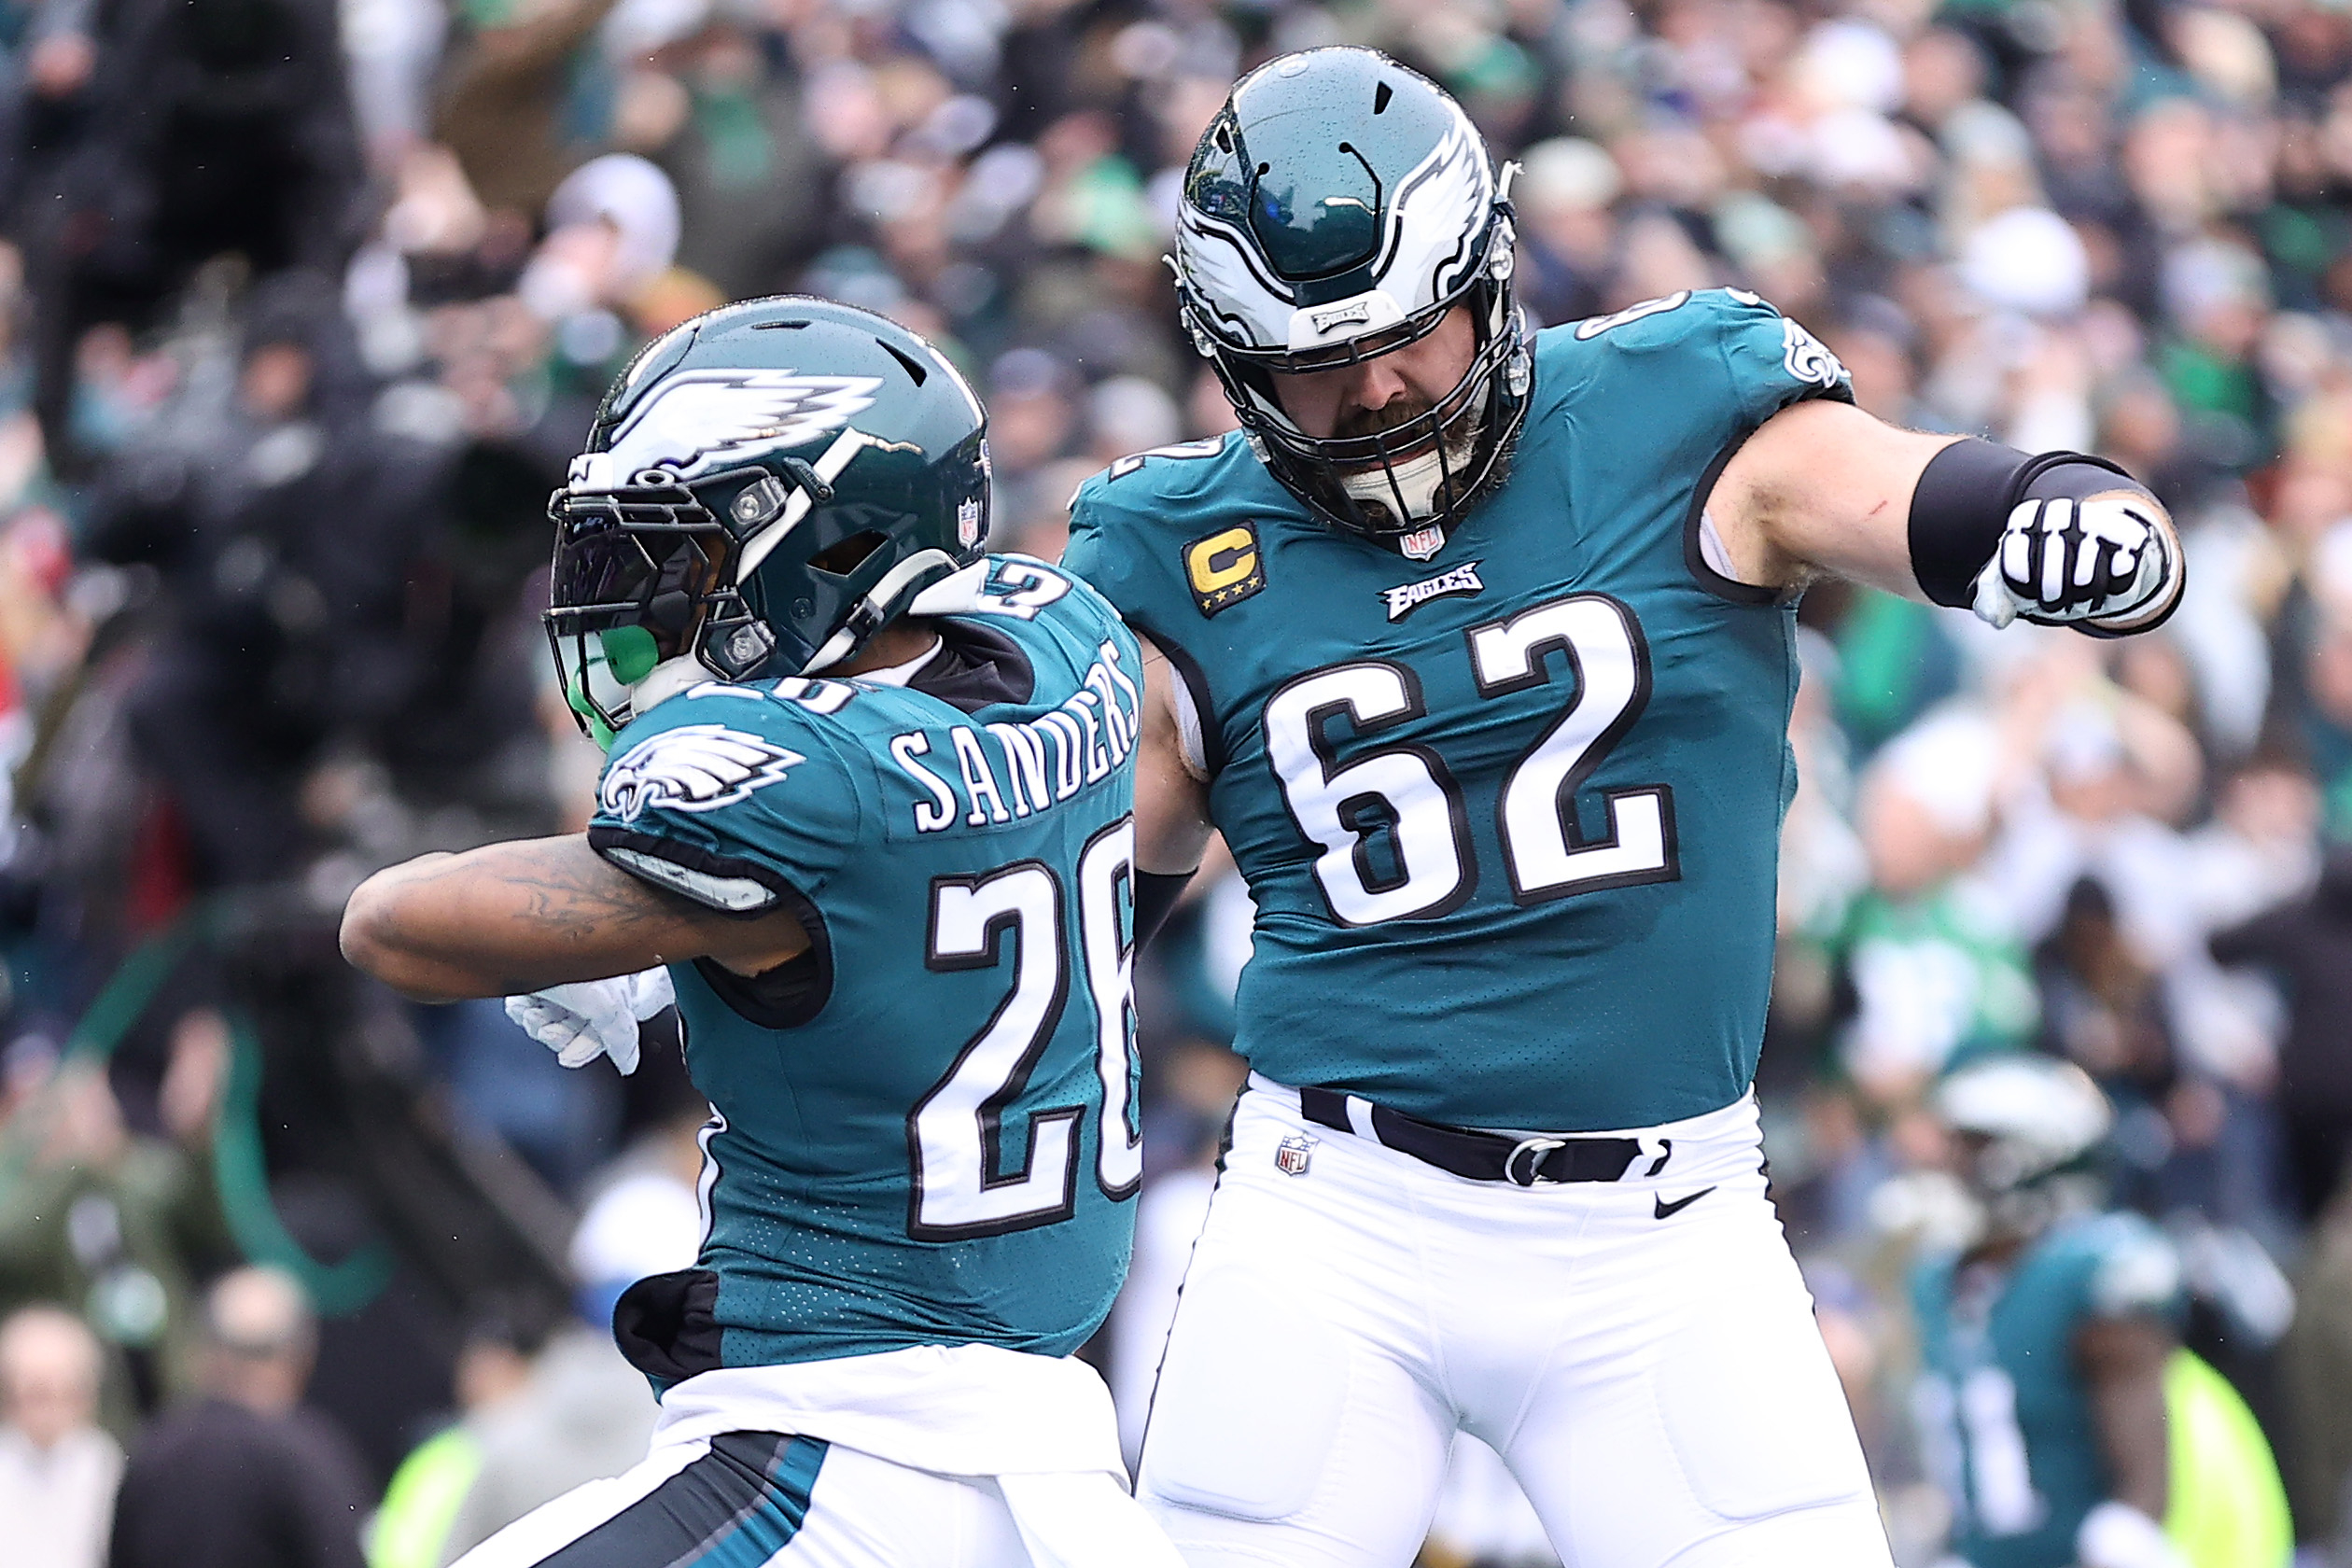 Two Philadelphia Eagles football players celebrating on the field